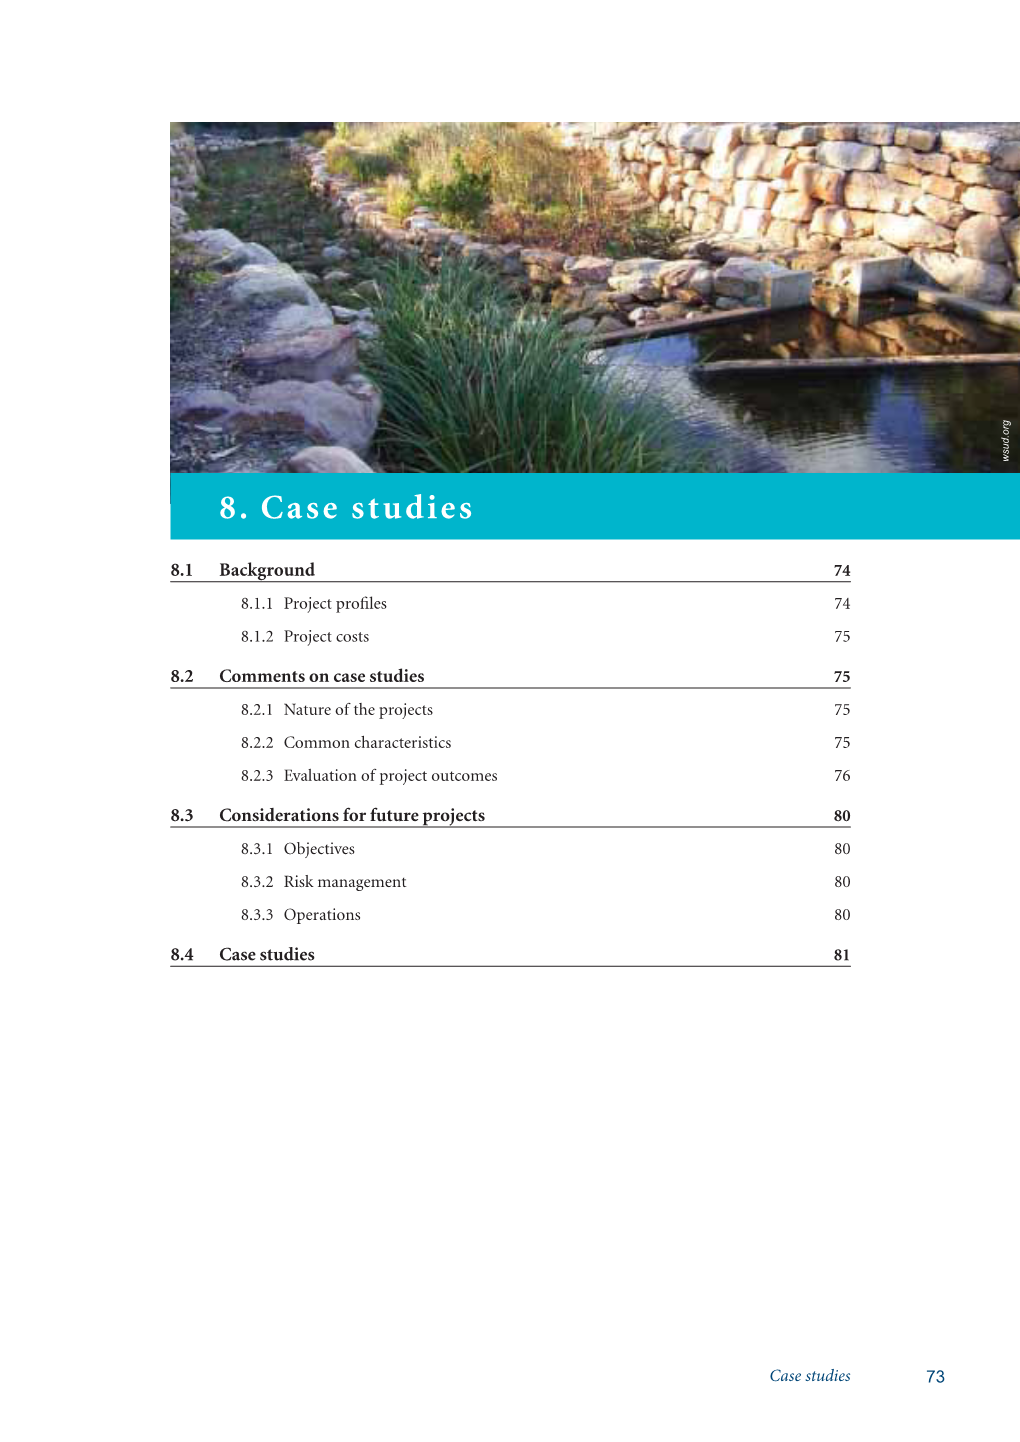 Managing Urban Stormwater: Harvesting and Reuse 8.1.2 Project Costs Recurrent Costs Have Been Listed for Each Case Study Where Cost Information Was Available